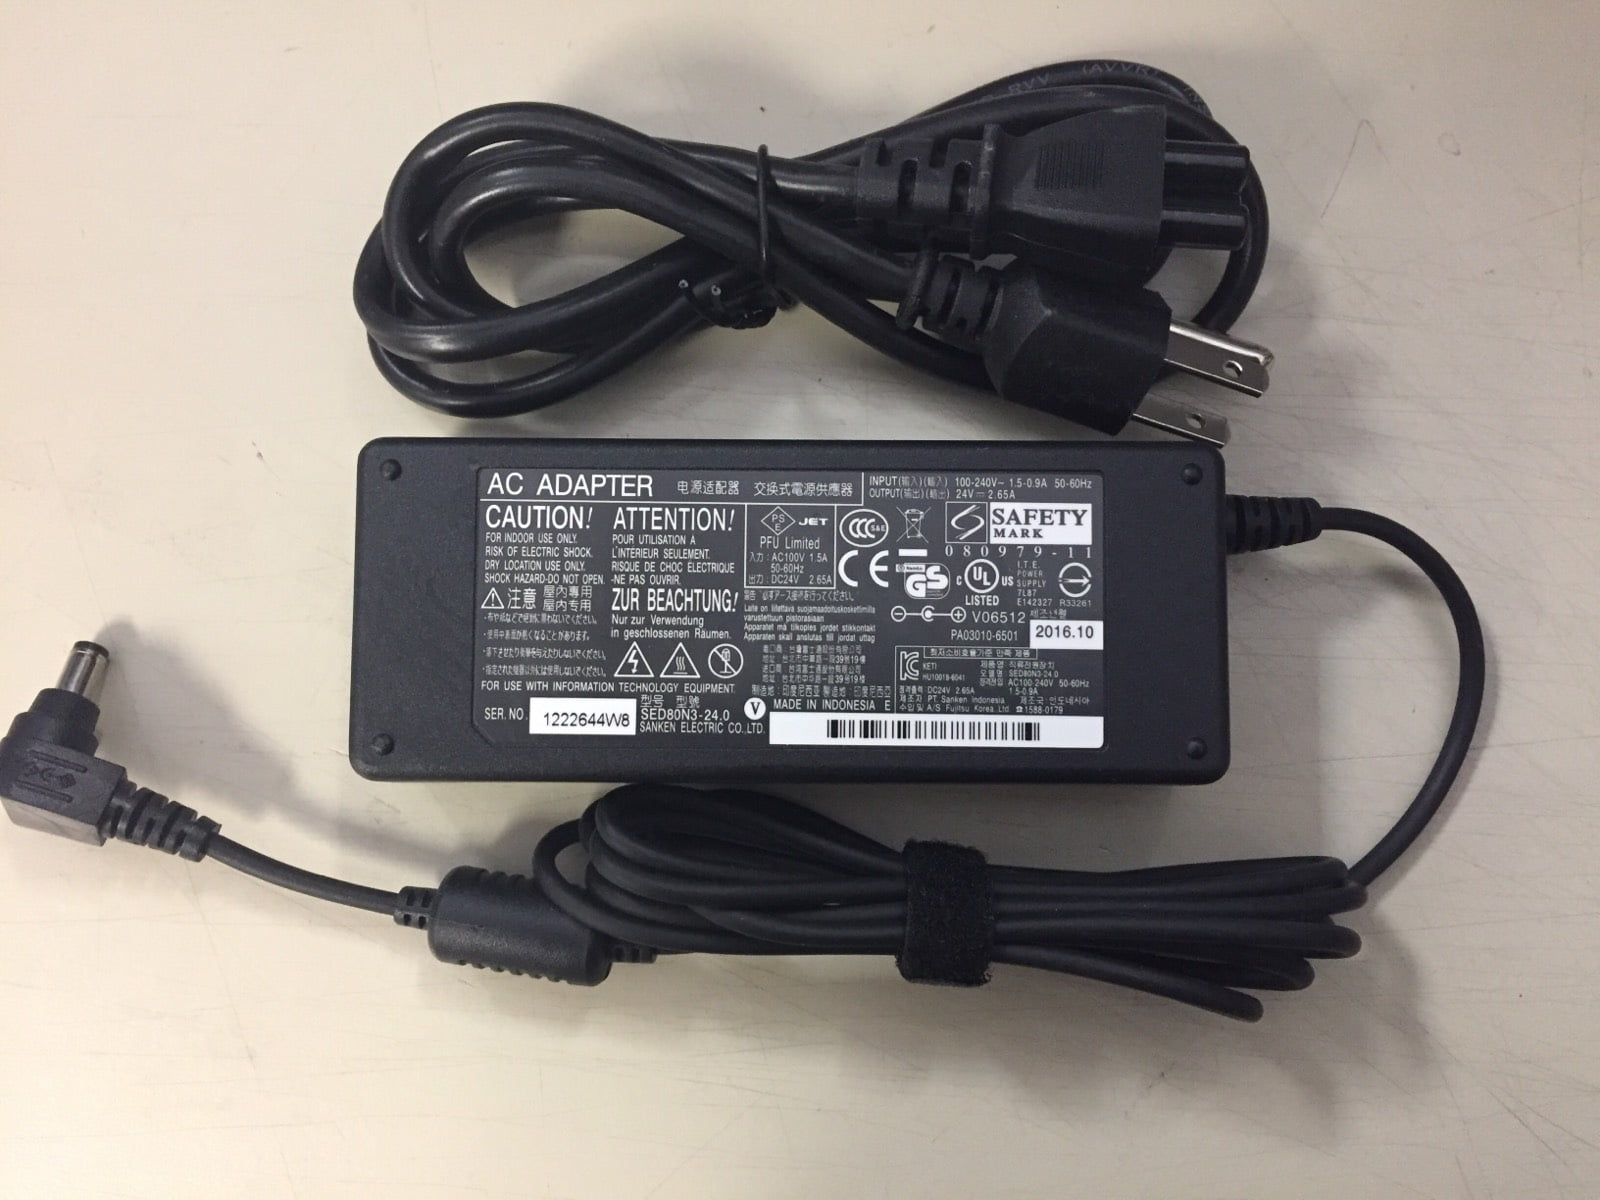  PK Power AC/DC Adapter for Fujitsu PA03670-B101 fi-7140 fi7140  Image Scanner Power Supply Cord Cable PS Charger Mains PSU : Electronics